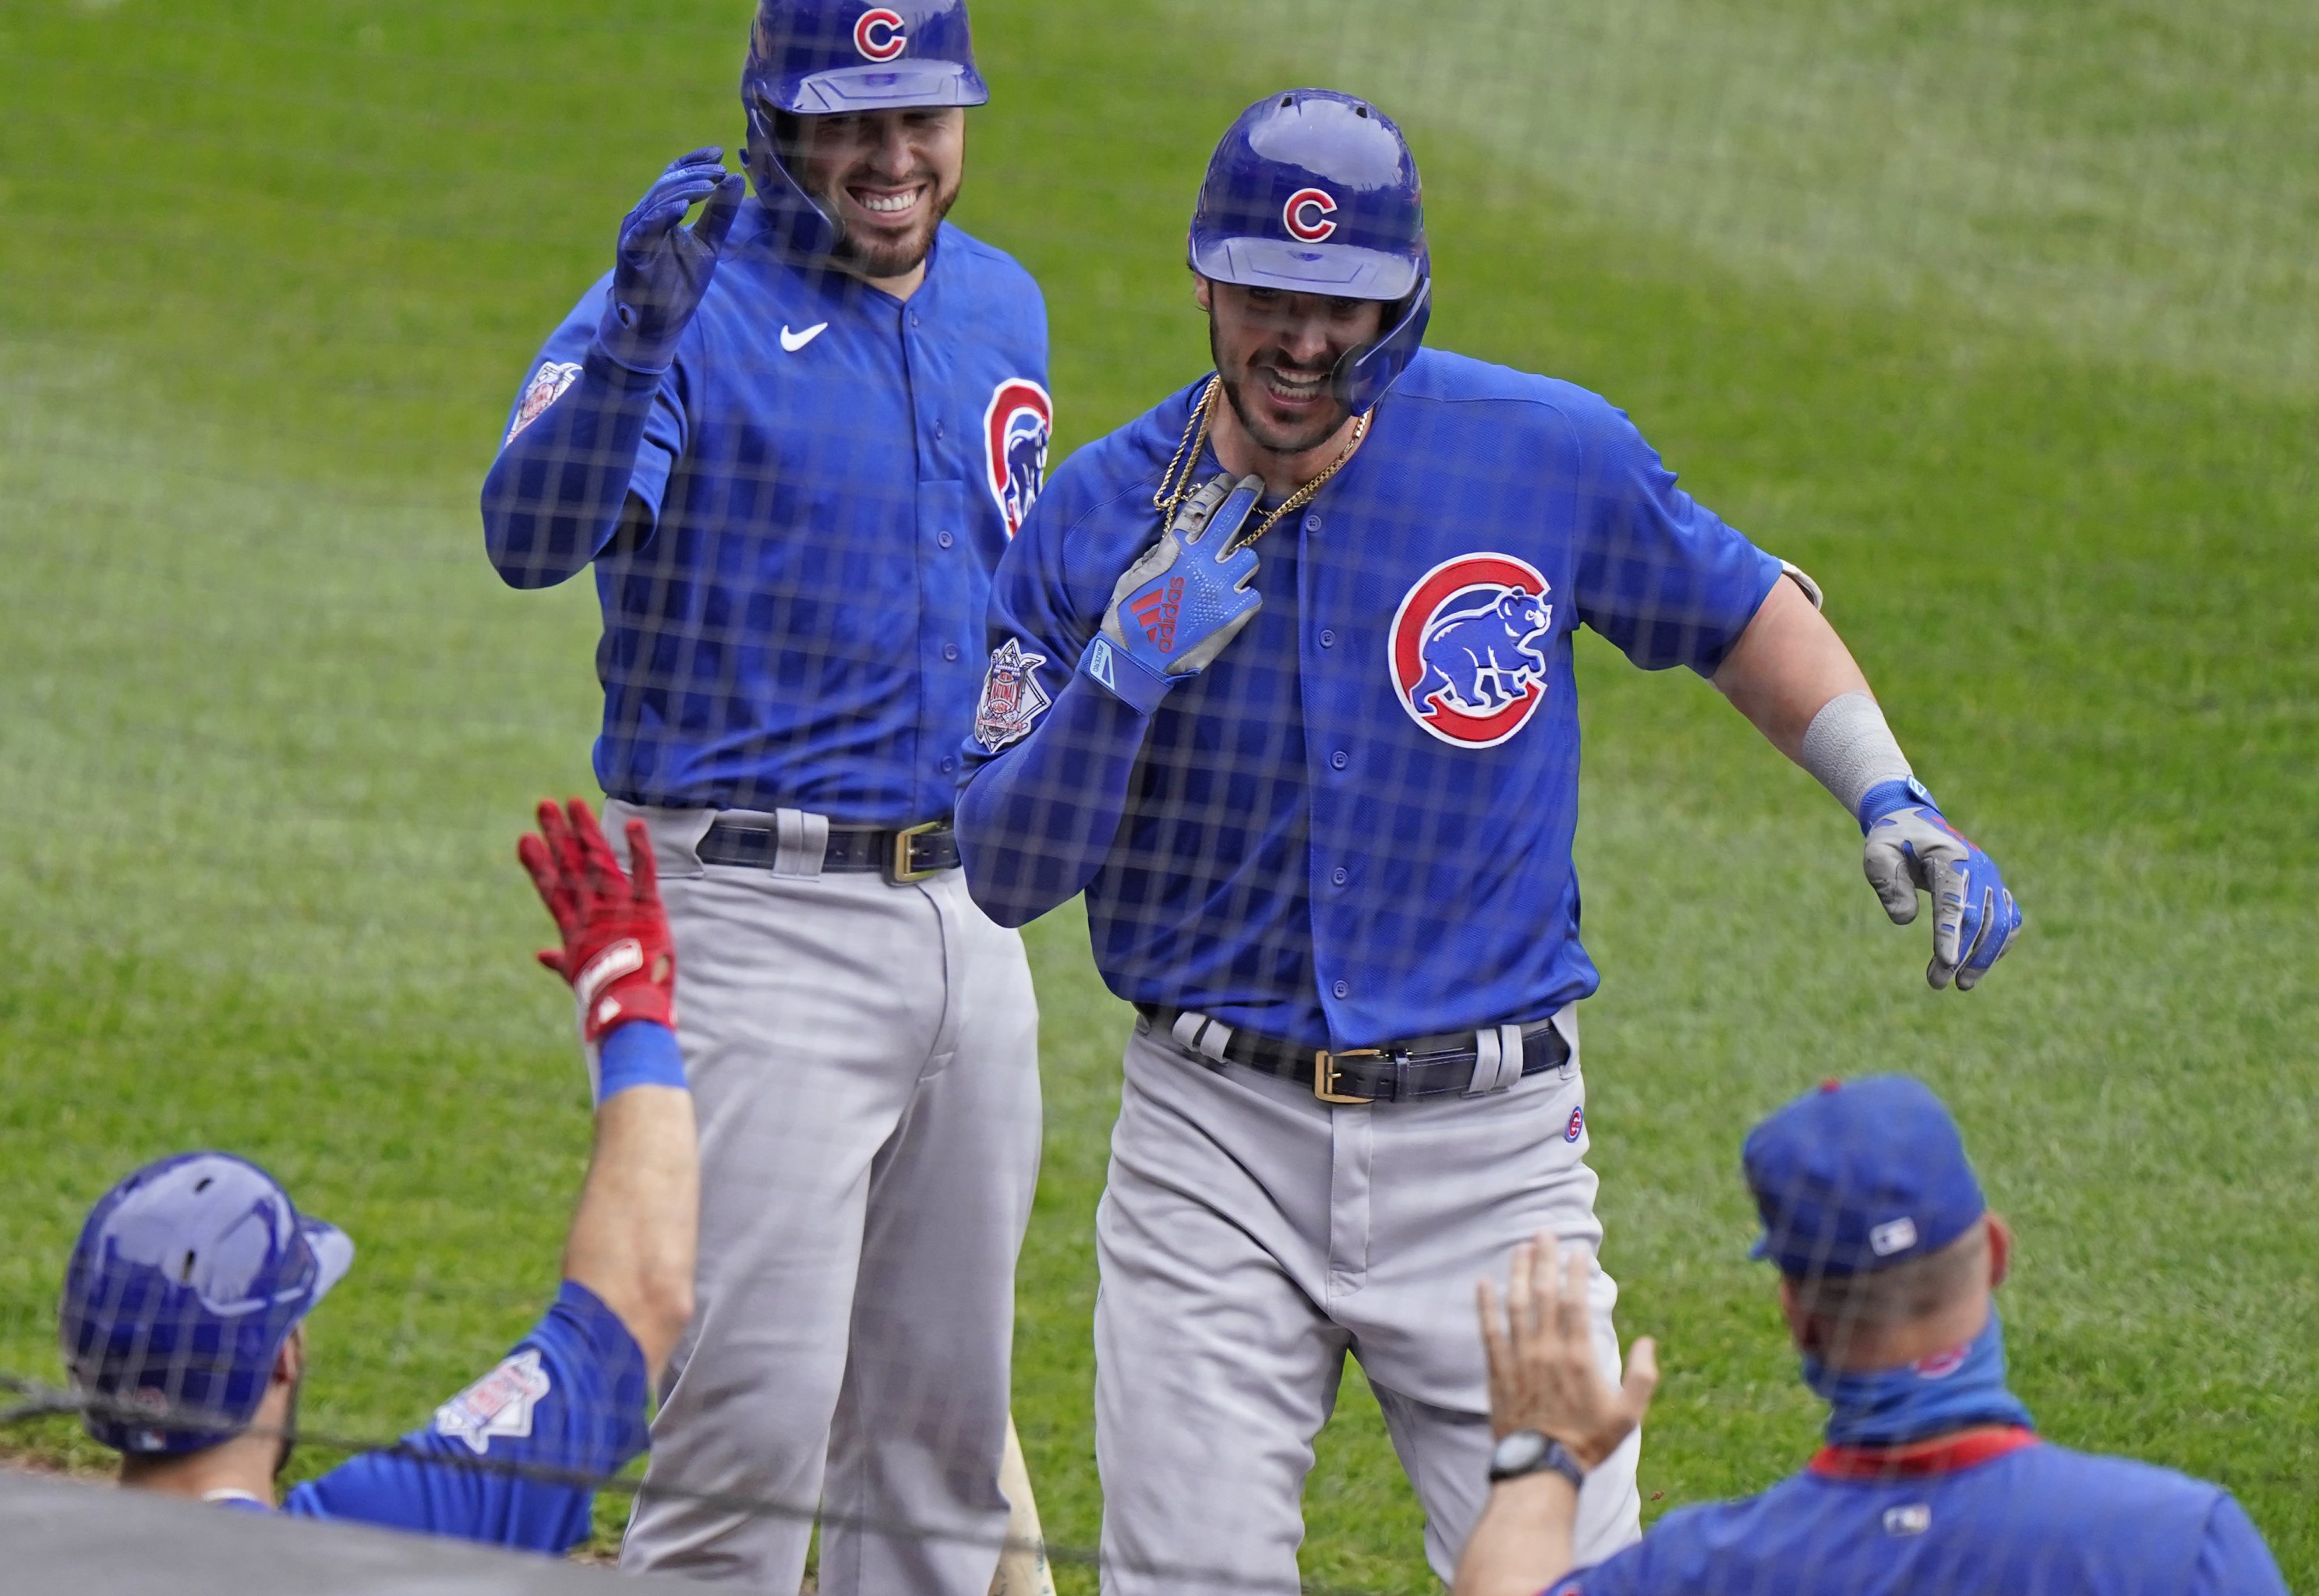 Kris Bryant called up: Projecting the young slugger - Beyond the